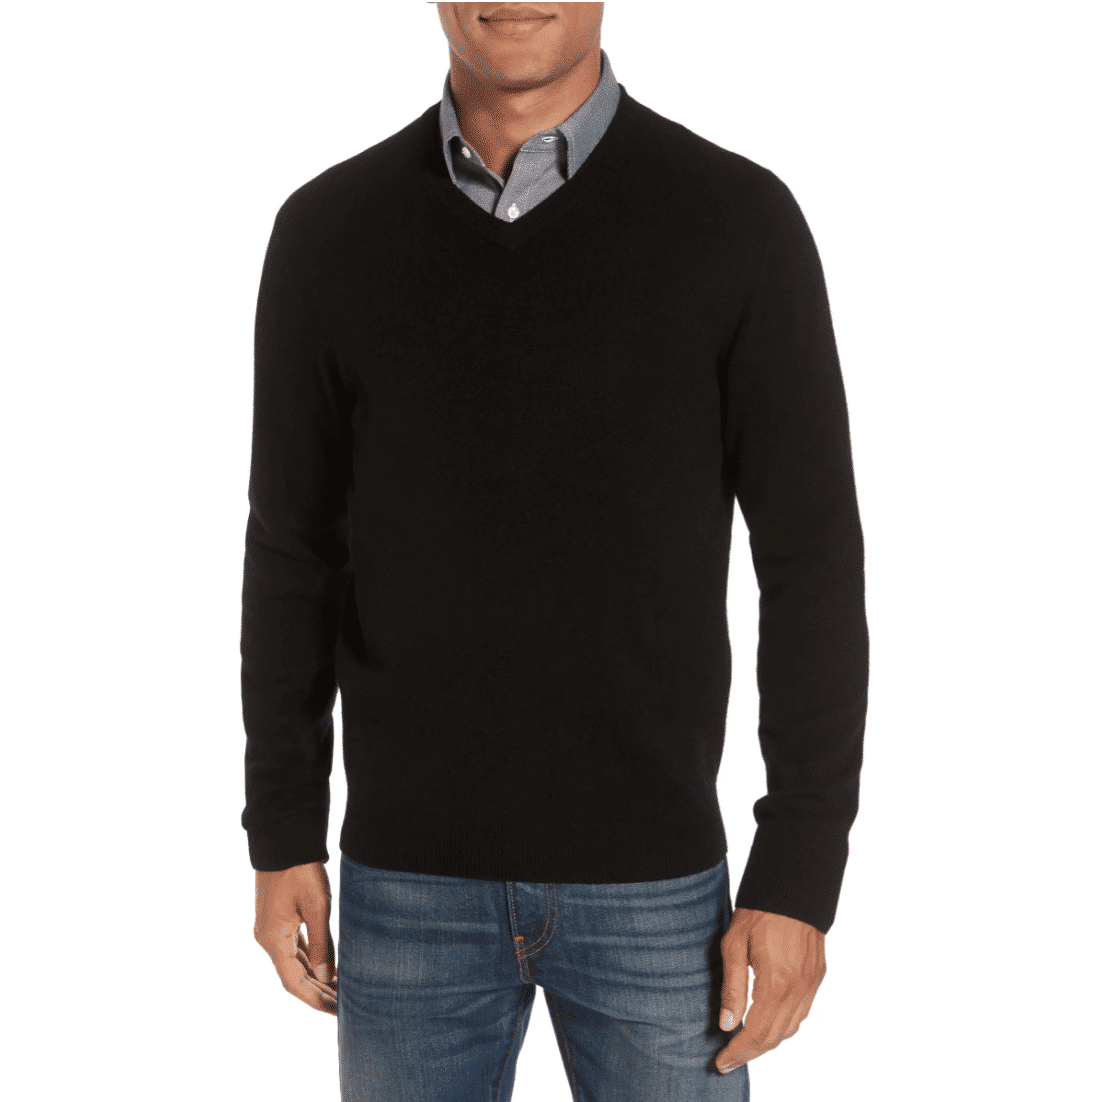 best gifts for him vneck sweater